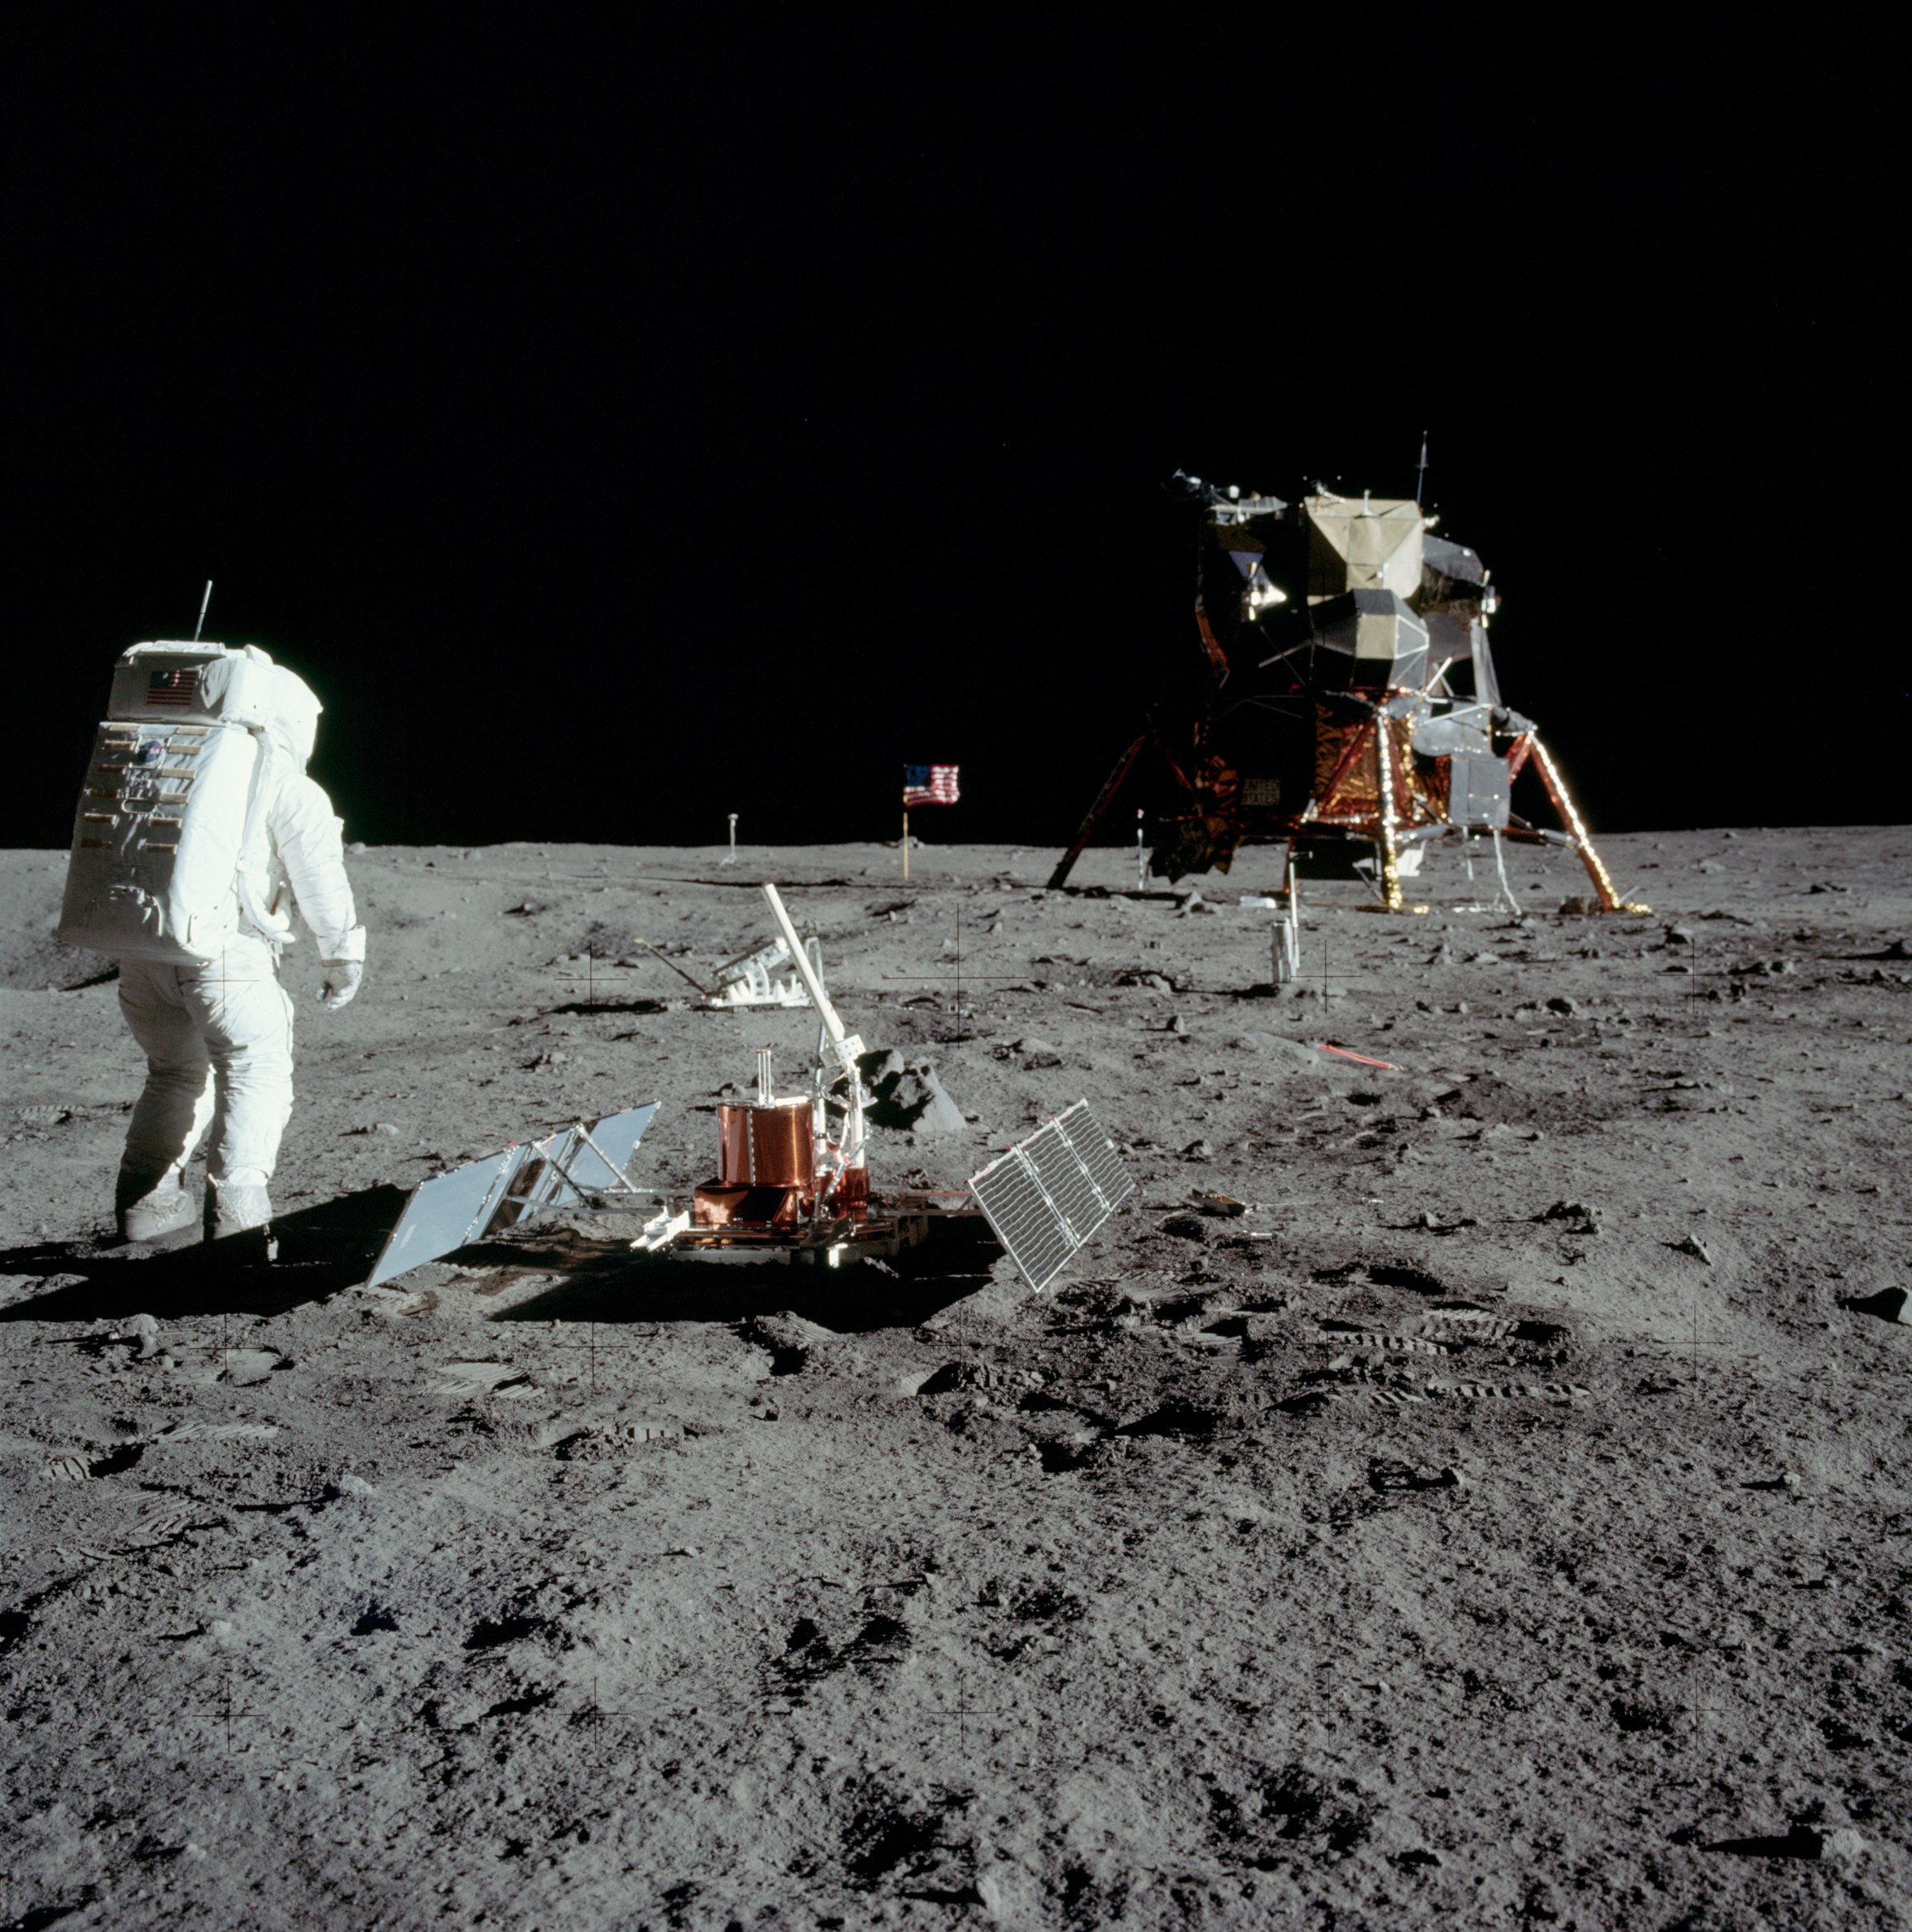 An astronaut stands on the Moon. He is in a spacesuit and his back is facing the camera. On his right is a copper-colored metal drum with two solar panel arrays on the left and right, extended like wings. A laser reflector is beyond the drum. Going backwards into the image, the lunar module stands on four legs and is copper and silver. Further back, an American flag is planted into the dusty Moon.